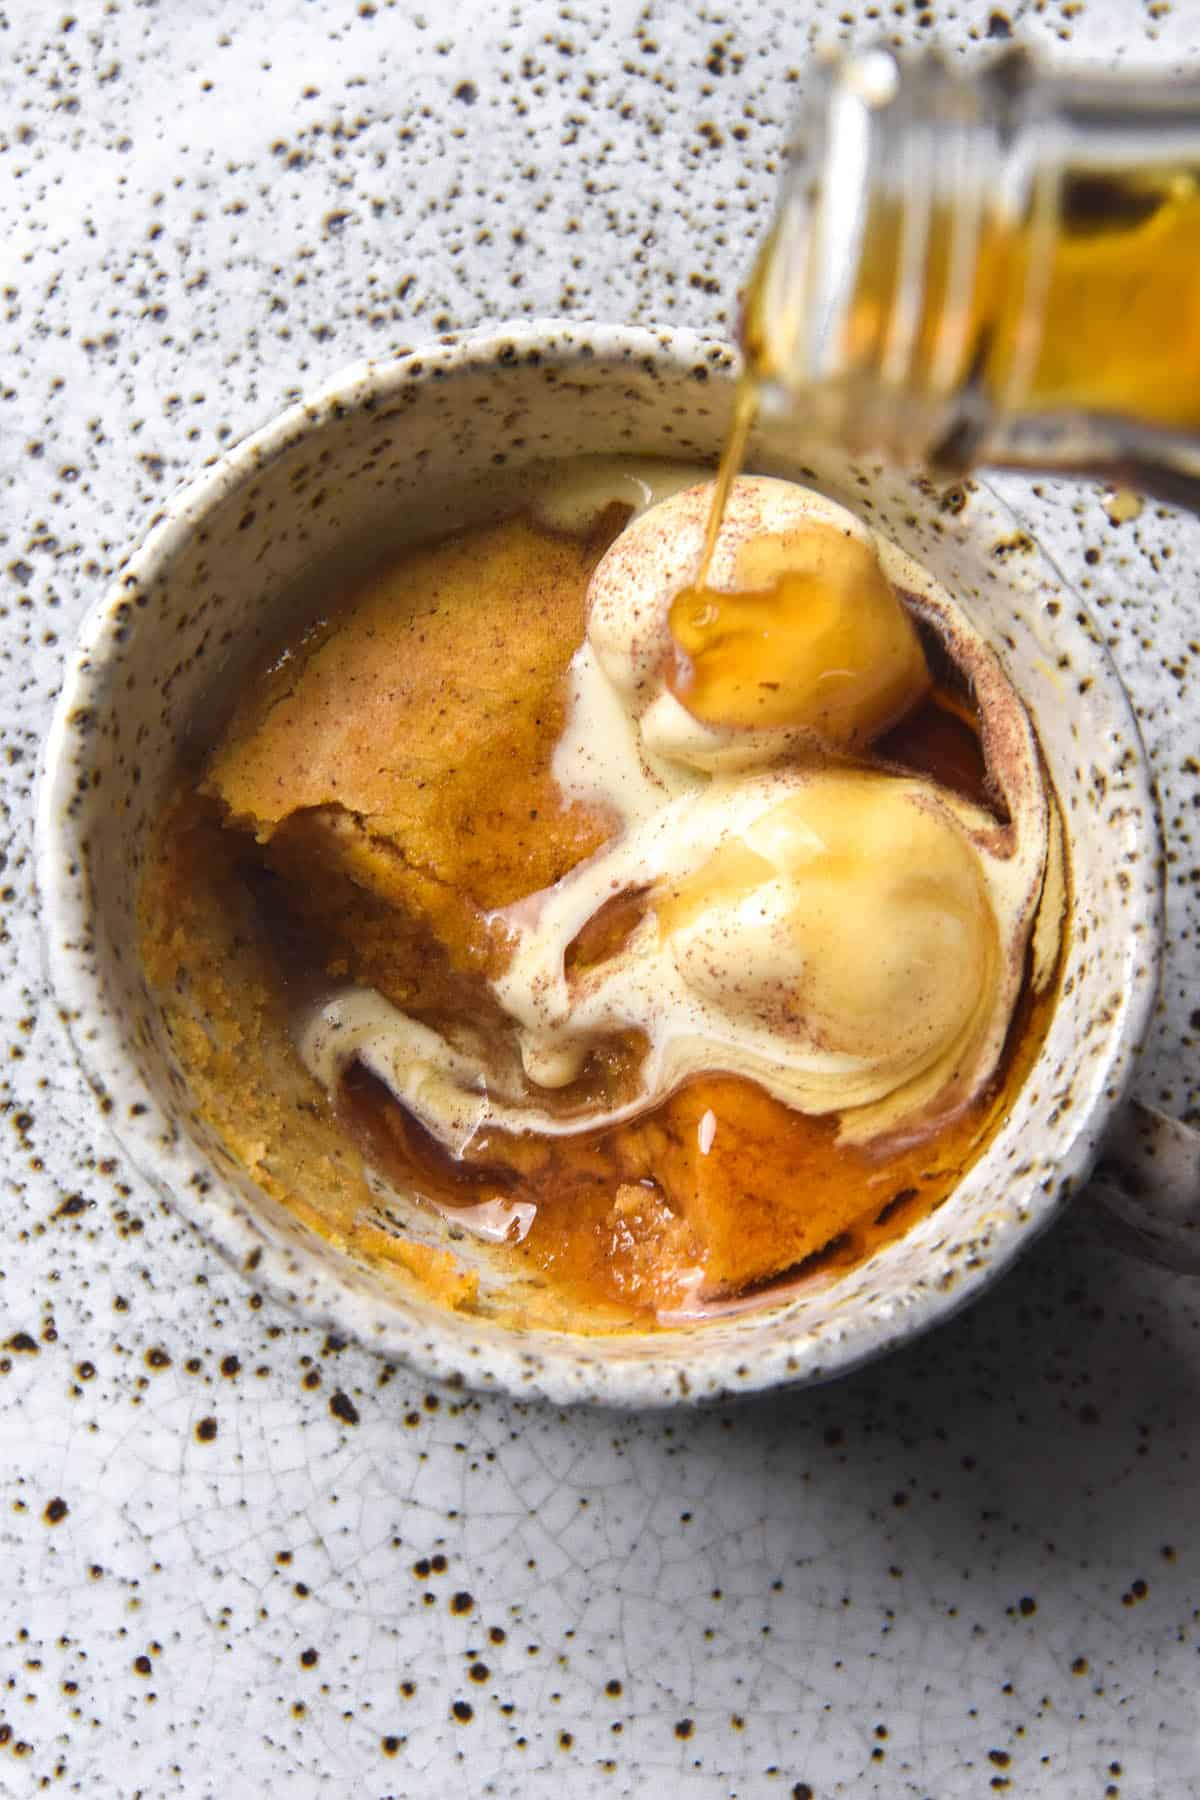 An aerial image of a gluten free pumpkin mug cake in a white ceramic speckled mug atop a white speckled ceramic plate. The mug cake has a spoonful removed and is topped with melting vanilla ice cream and cinnamon sugar. A bottle of maple syrup extends over the right side of the image to pour syrup over the ice cream. The syrup and ice cream mingle together in the crevice left from the eaten cake.